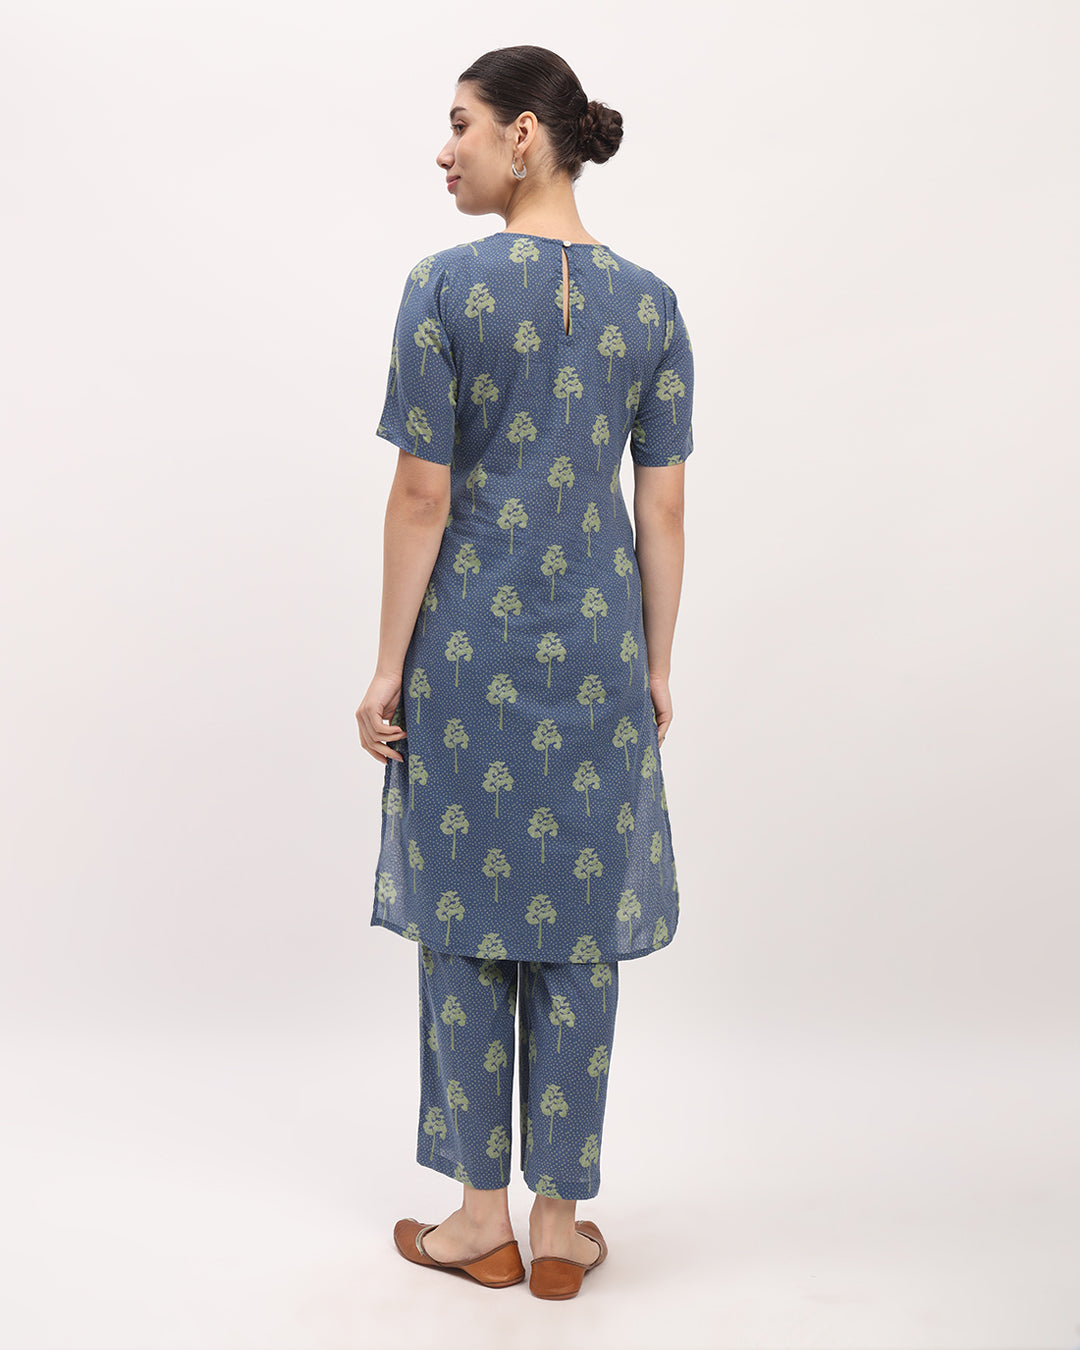 Combo: Maple Leaf & English Floral Symphony Round Neck Printed Kurta (Without Bottoms)